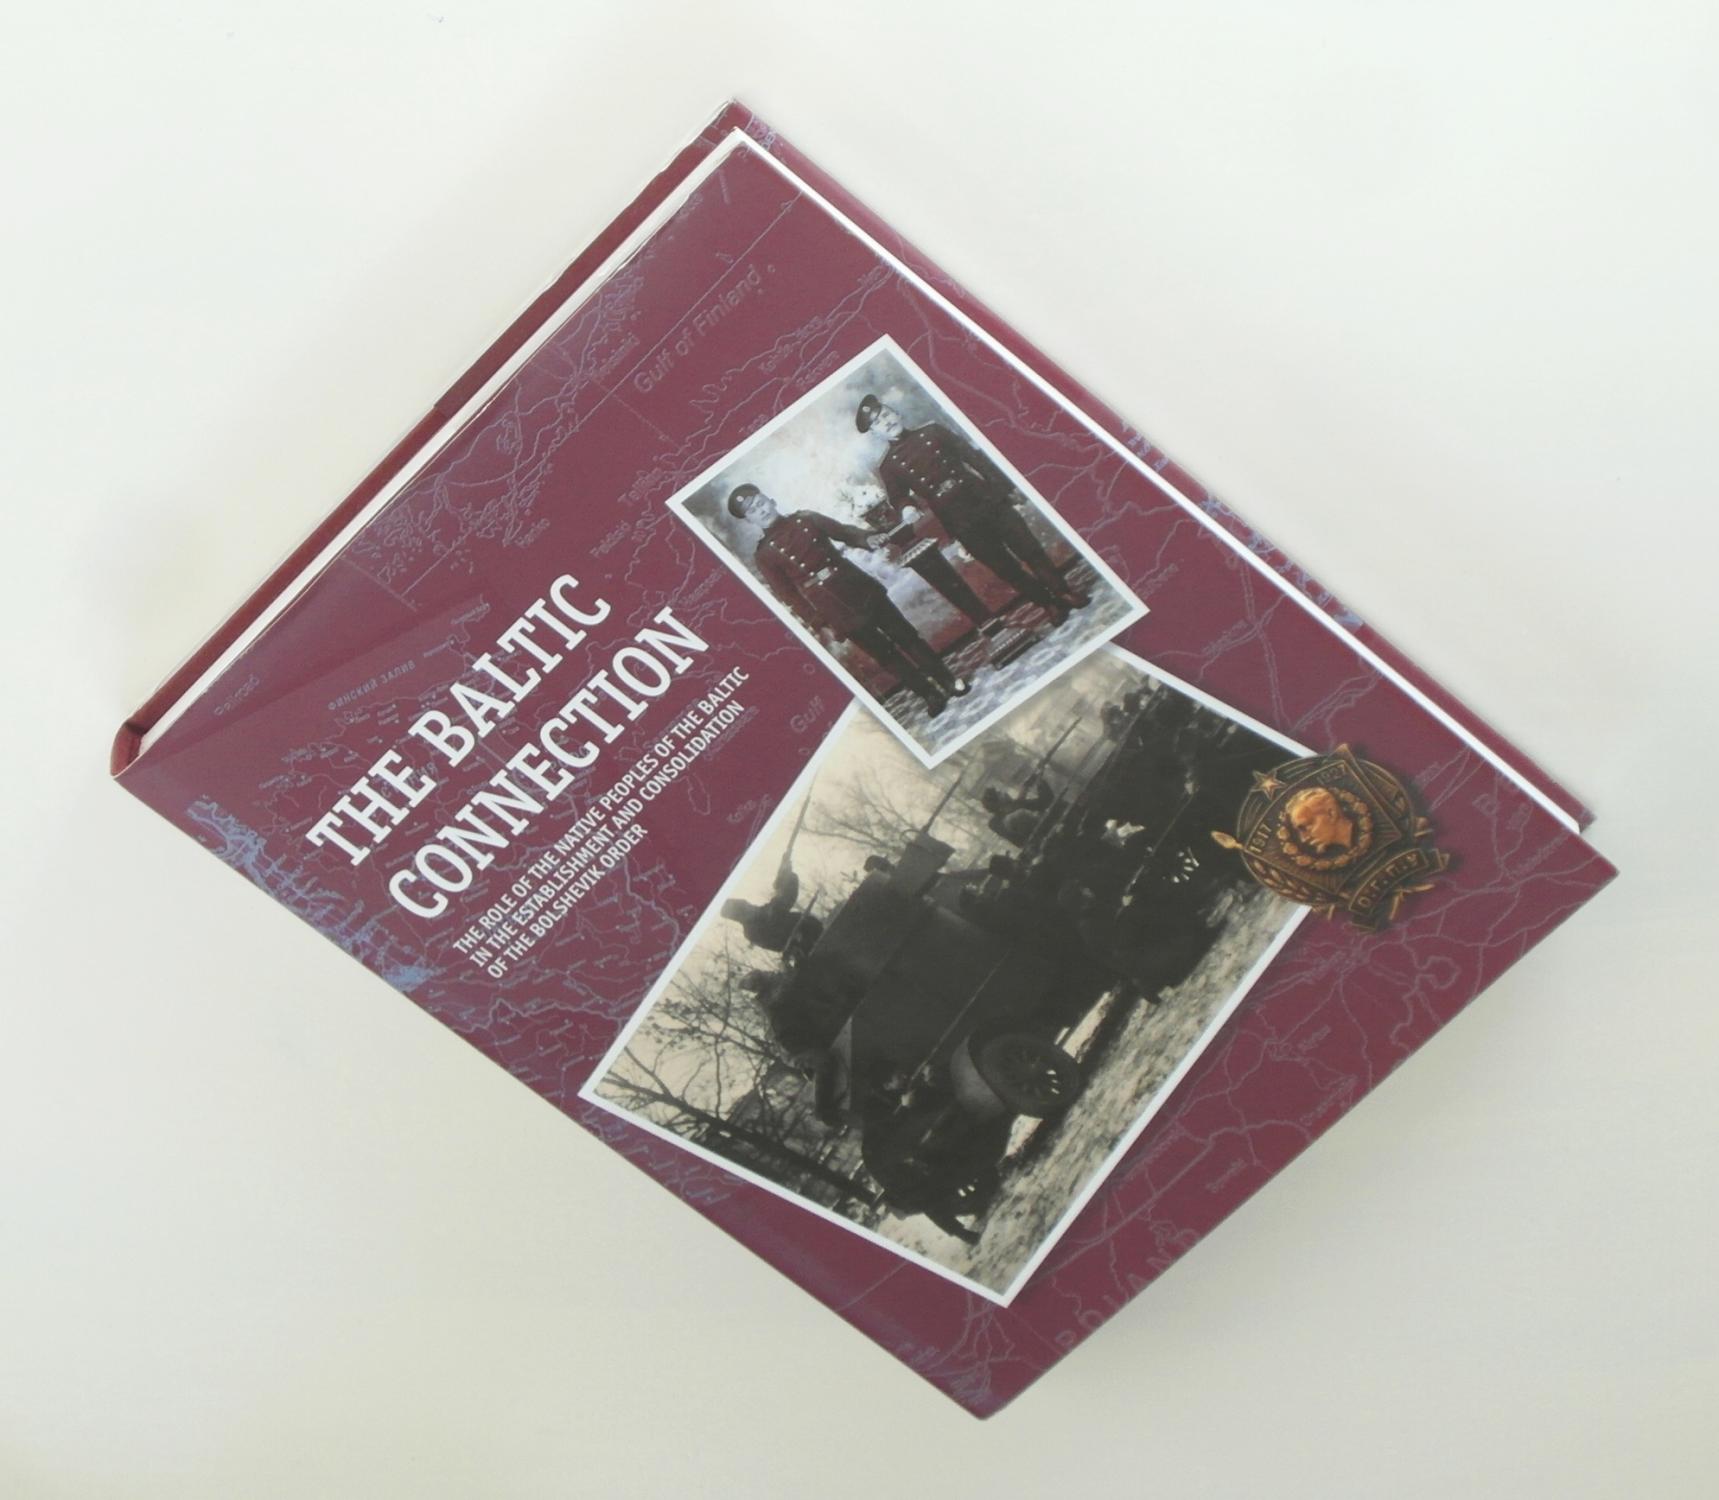 The Baltic Connection. The Role of the Native Peoples of the Baltic in the Establishment and Consolidation of the Bolshevik Order 1915-1938 Collected Documents and Materials - A.I. Kokurin and V.A. Goncharov